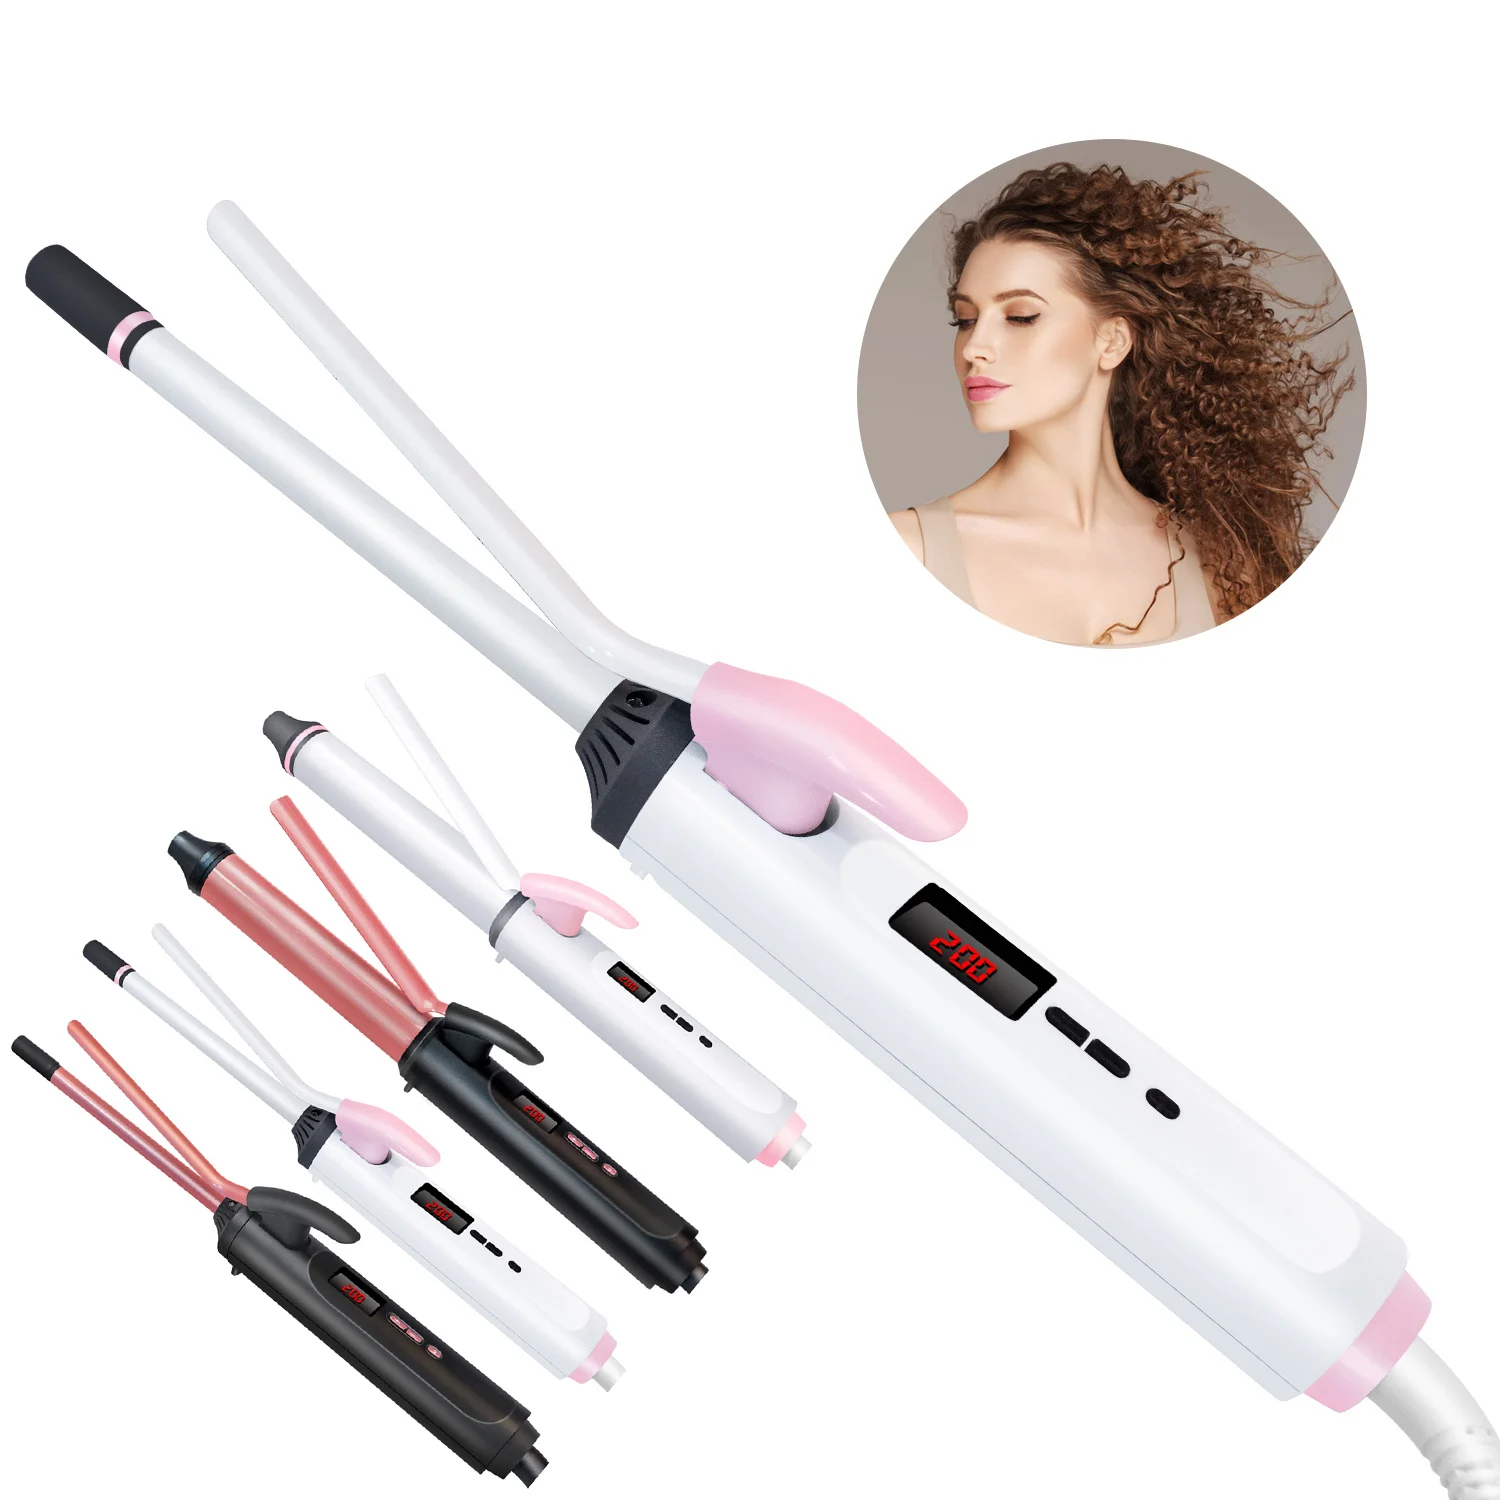 Hair Curling Iron Hair Curls Waves 9mm/26mm Curling Wand for Hair Curlers Waver Electric LCD Display Hair Flat Iron Styling Tool